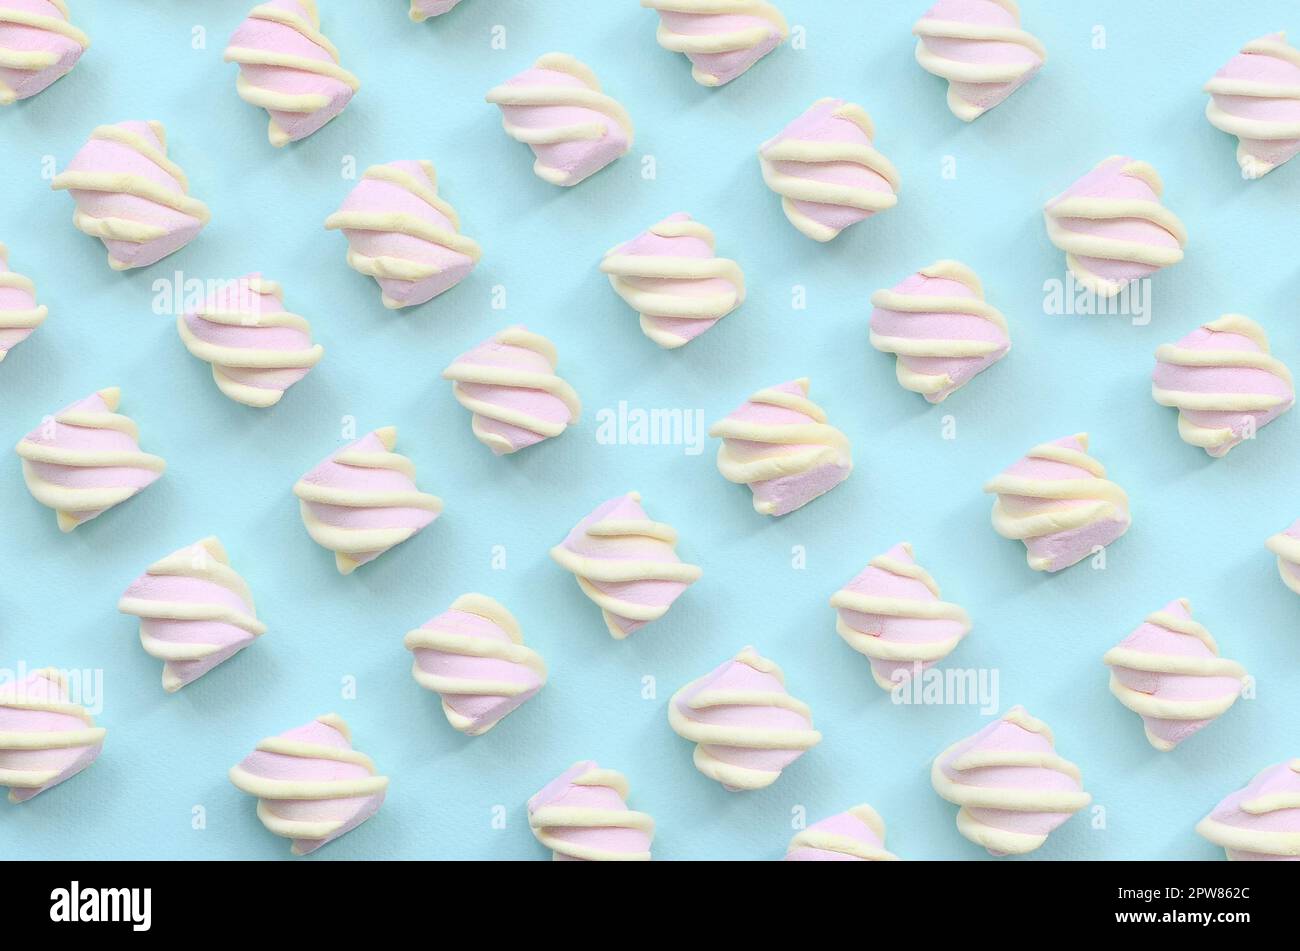 Colorful marshmallow laid out on blue paper background. pastel creative textured pattern. minimal. Stock Photo